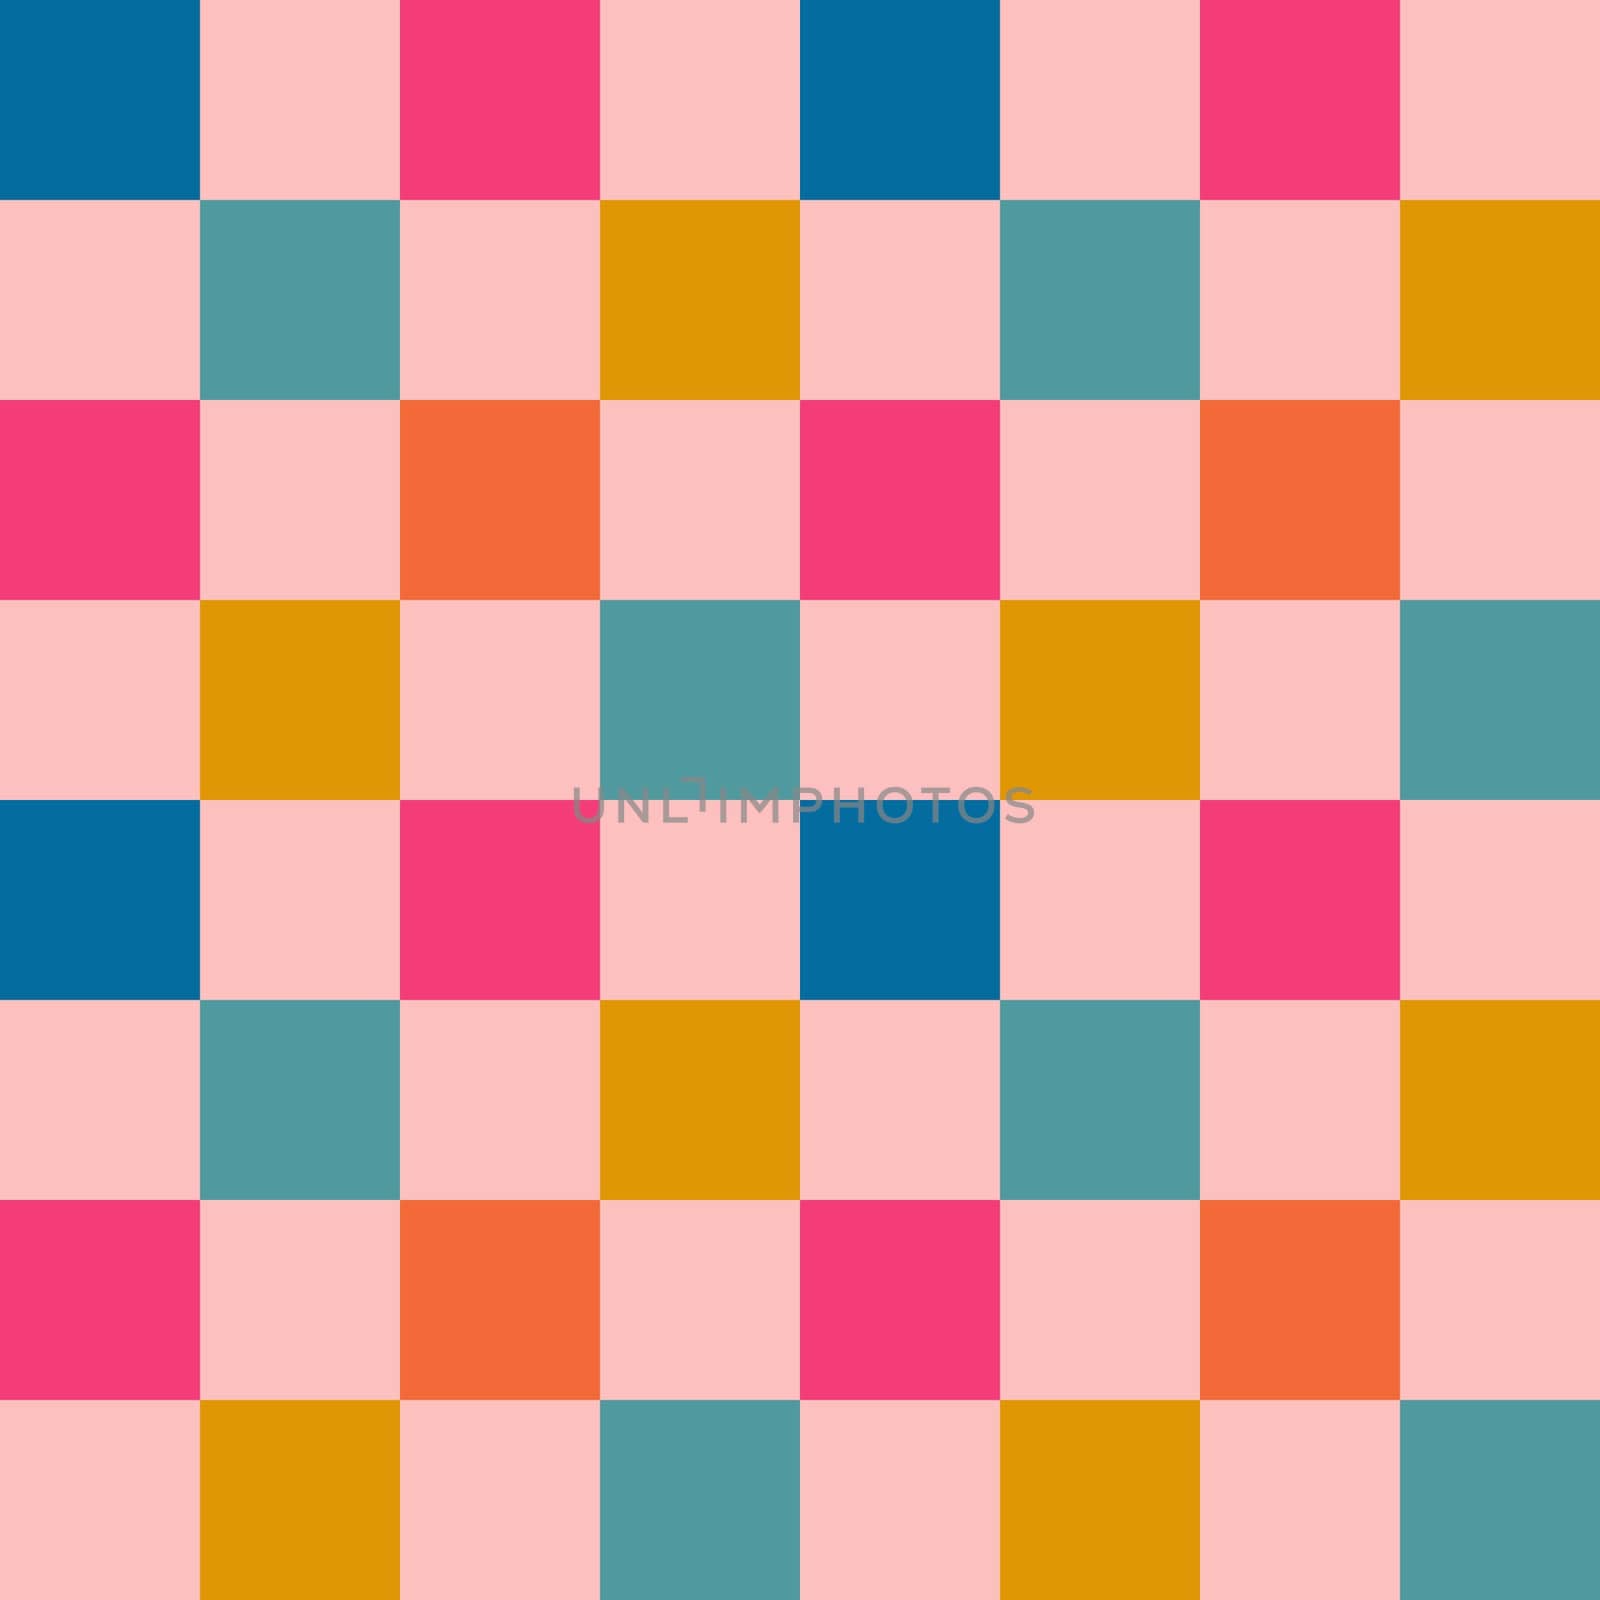 Hand drawn seamless pattern with colorful checks squares, pink blue yellow orange checkered checkerboard, mid century modern design style, contemporary abstract geometric print, 80s 90s retro art. by Lagmar